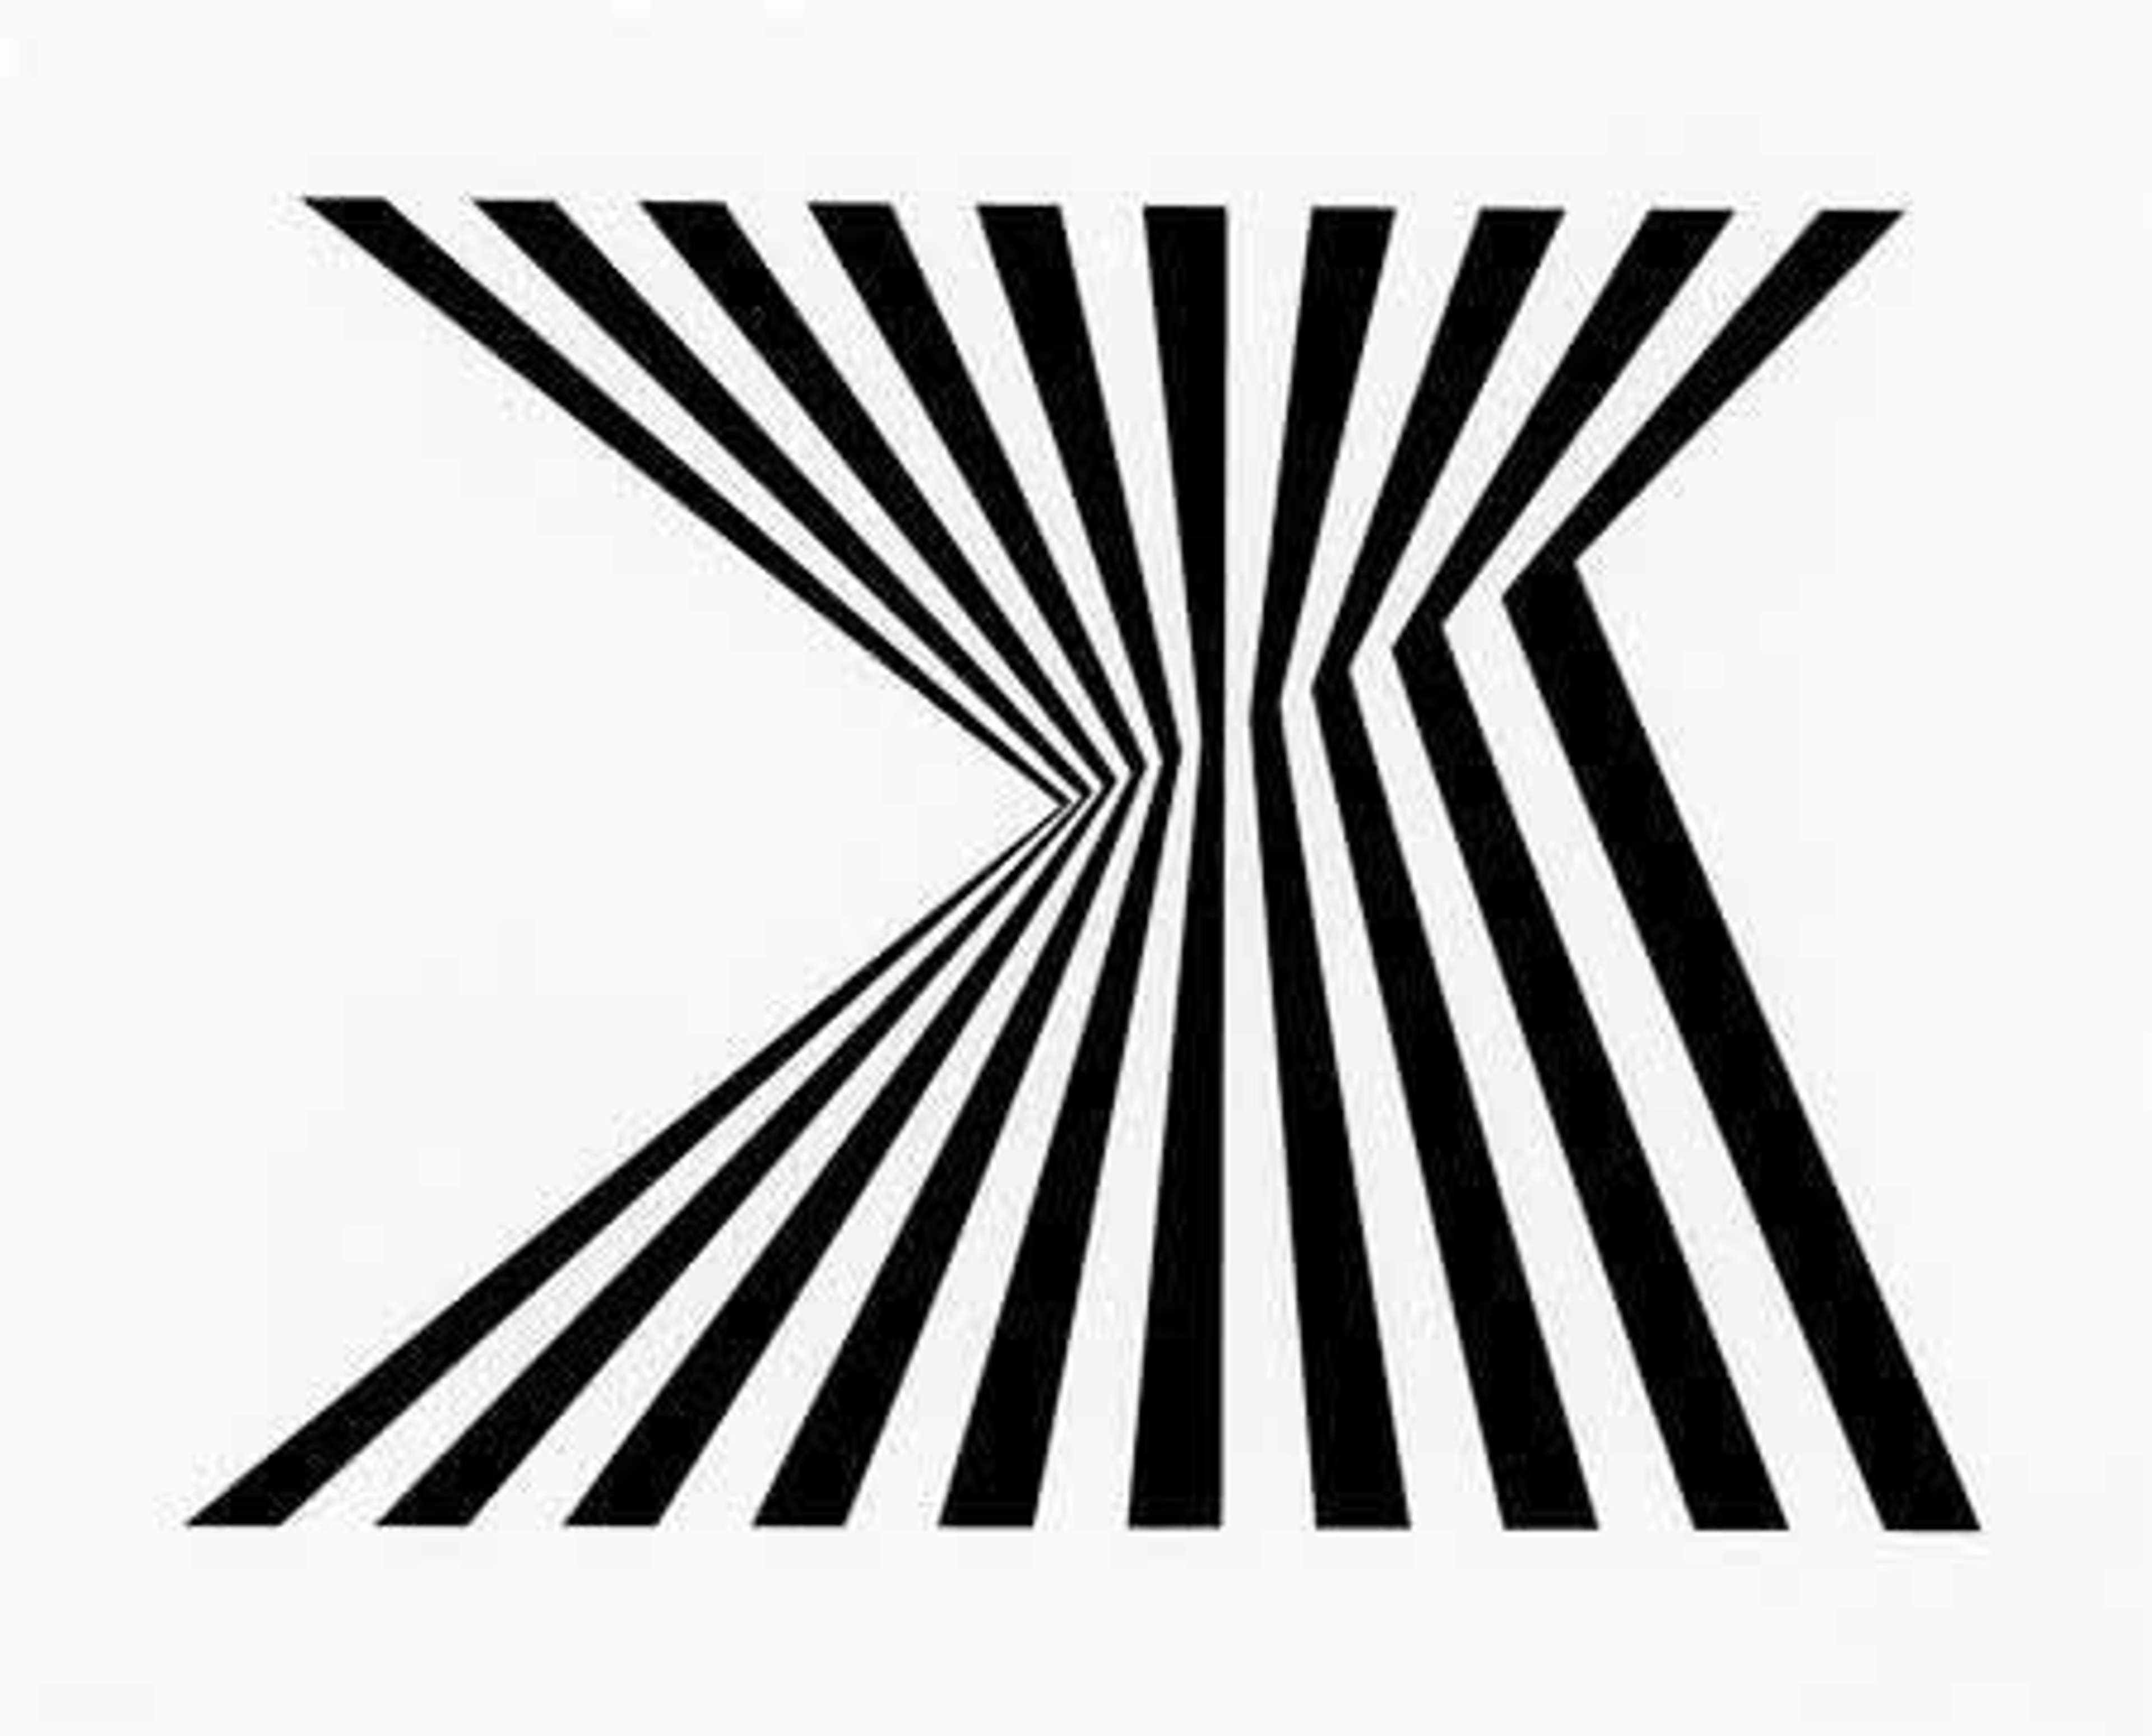 Ten black lines, against a white background, reach from the top and bottom of the artwork. The lines meet near the centre of the composition, converging at different points to produce an optical illusion.